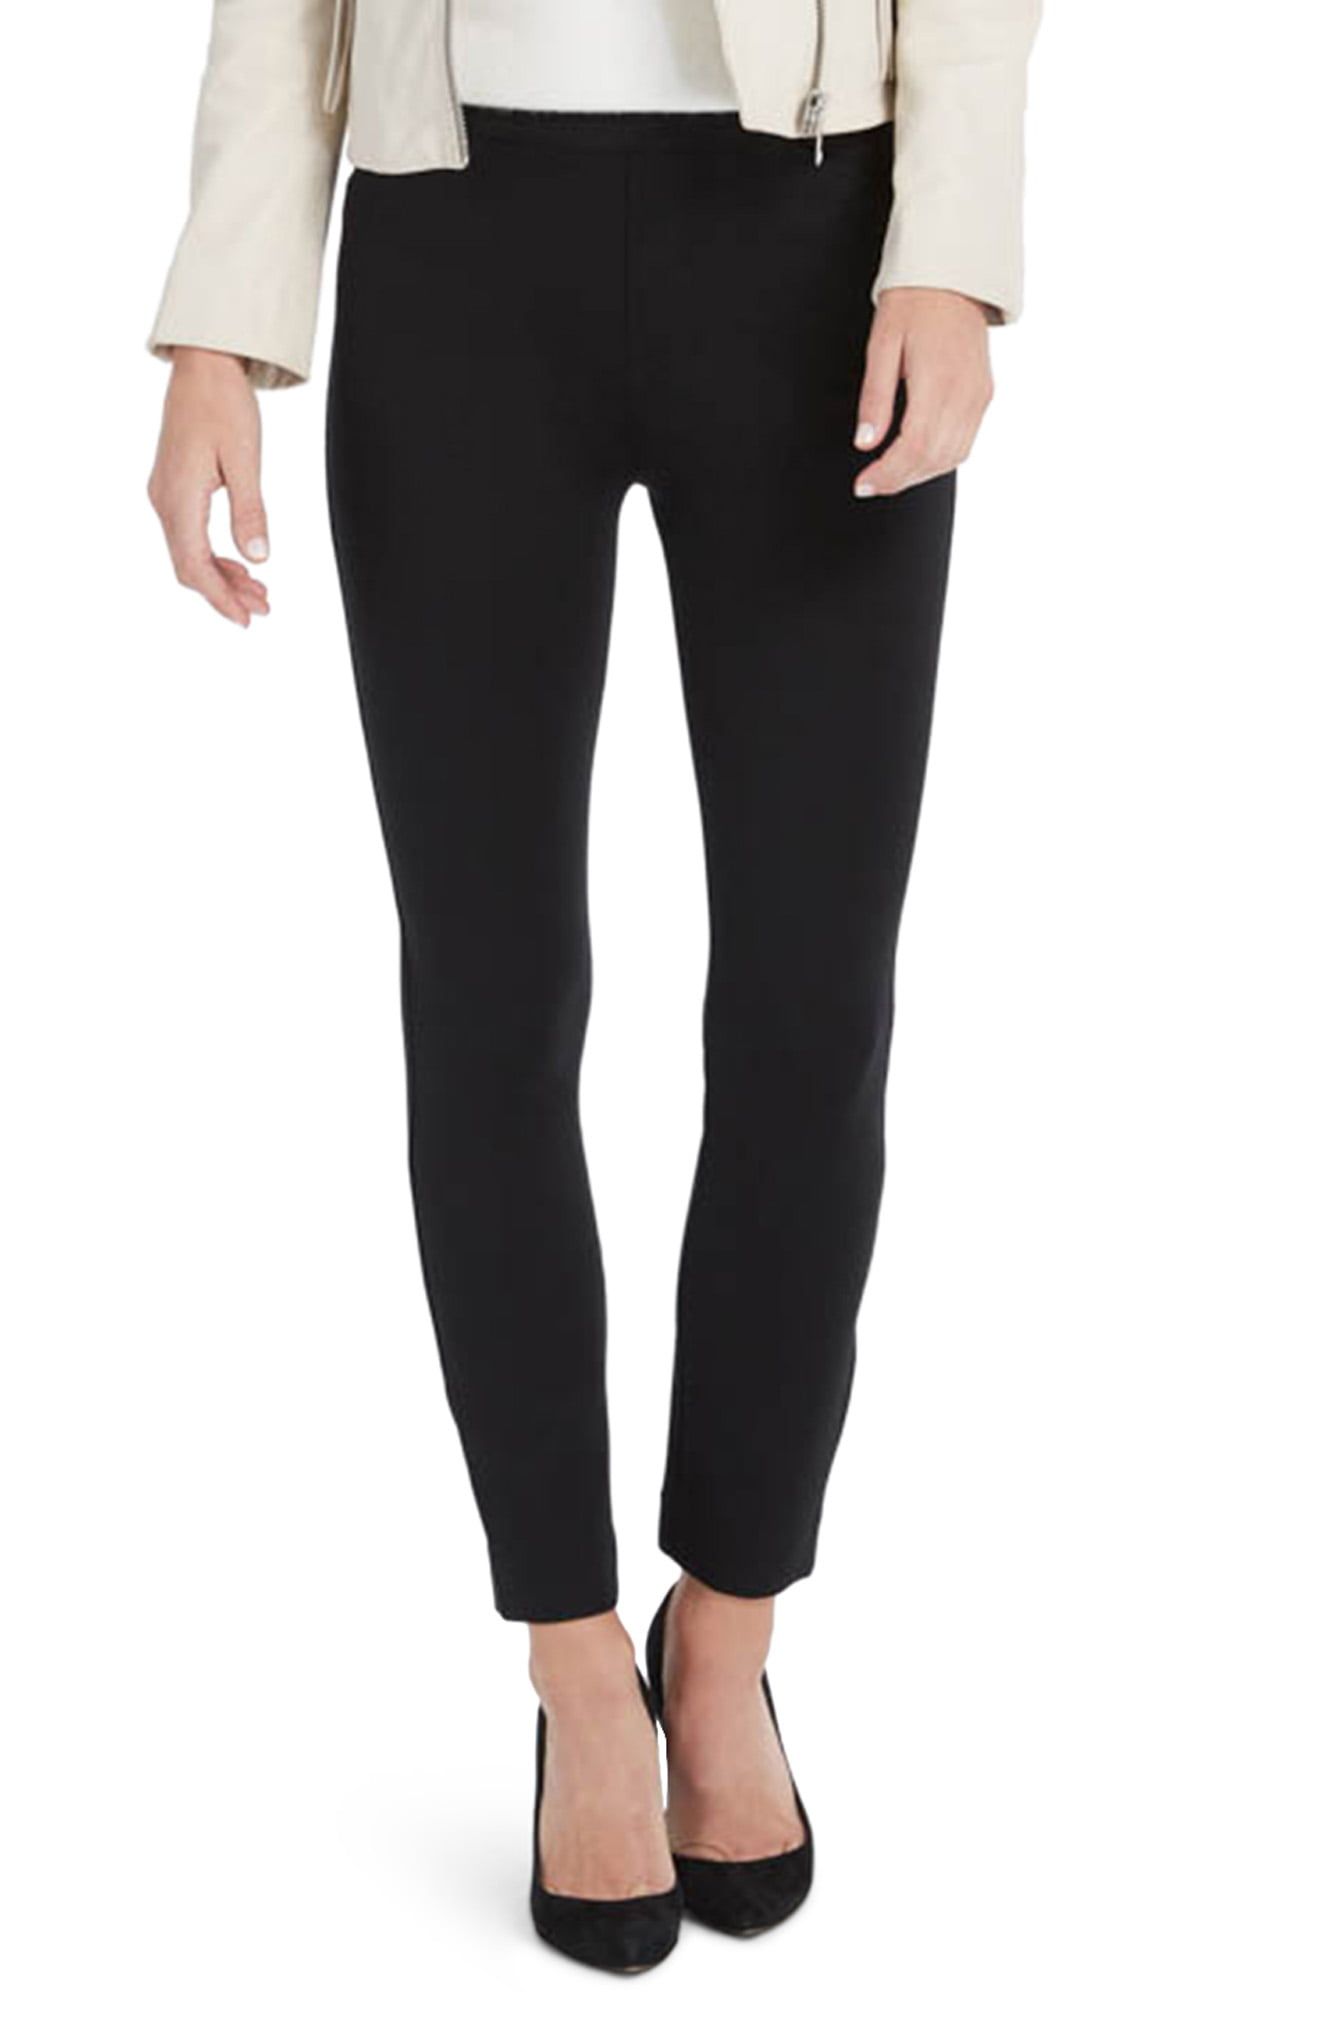 An honest review of all the Spanx pants  Cheryl Shops